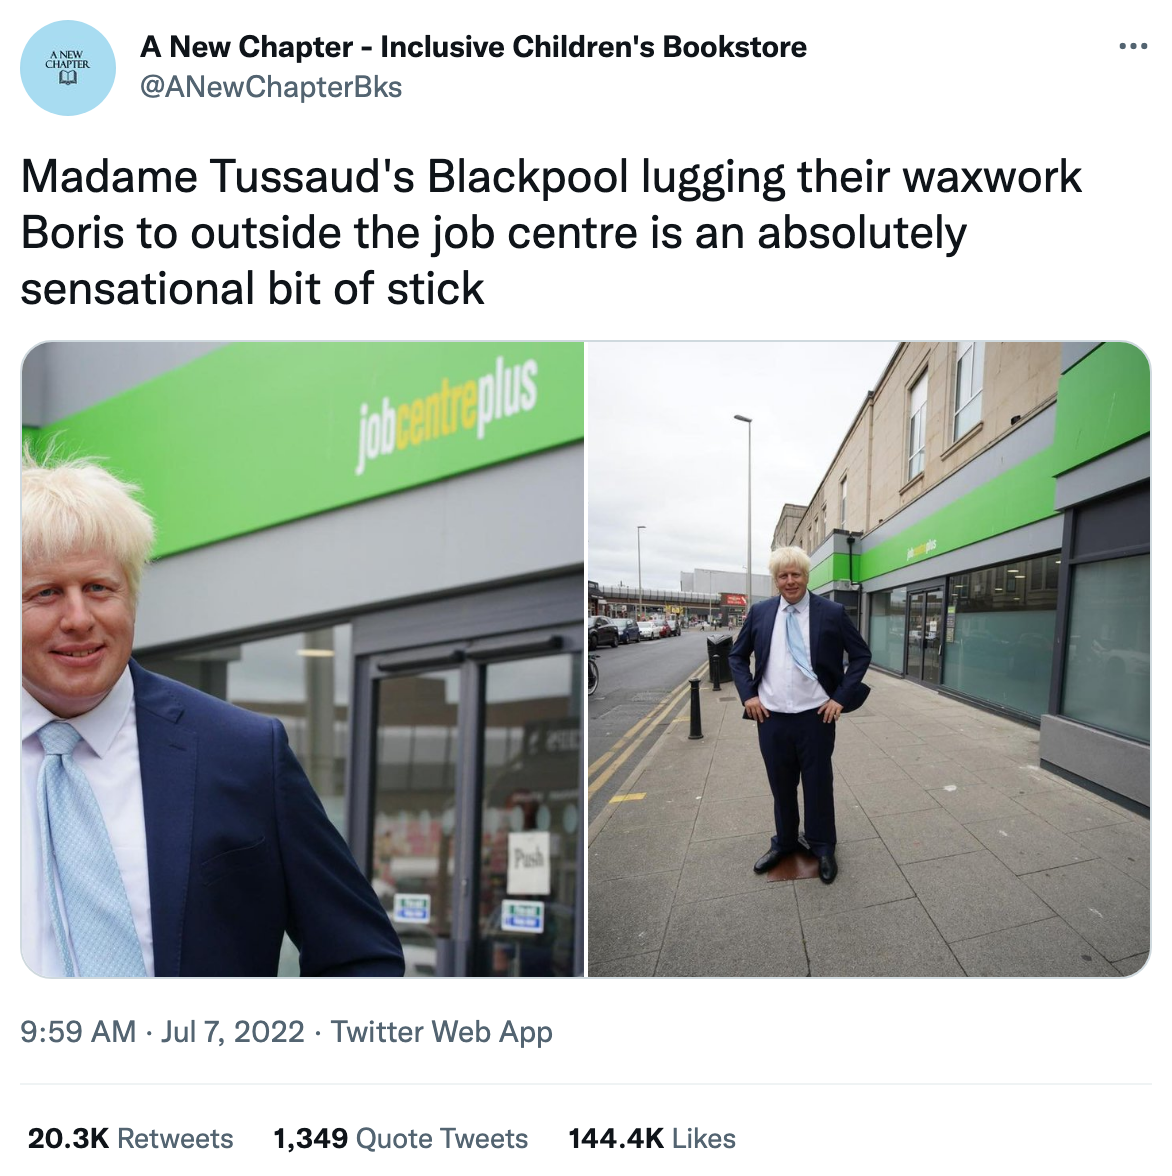 Madame Tussaud's Blackpool lugging their waxwork Boris to outside the job centre is an absolutely sensational bit of stick